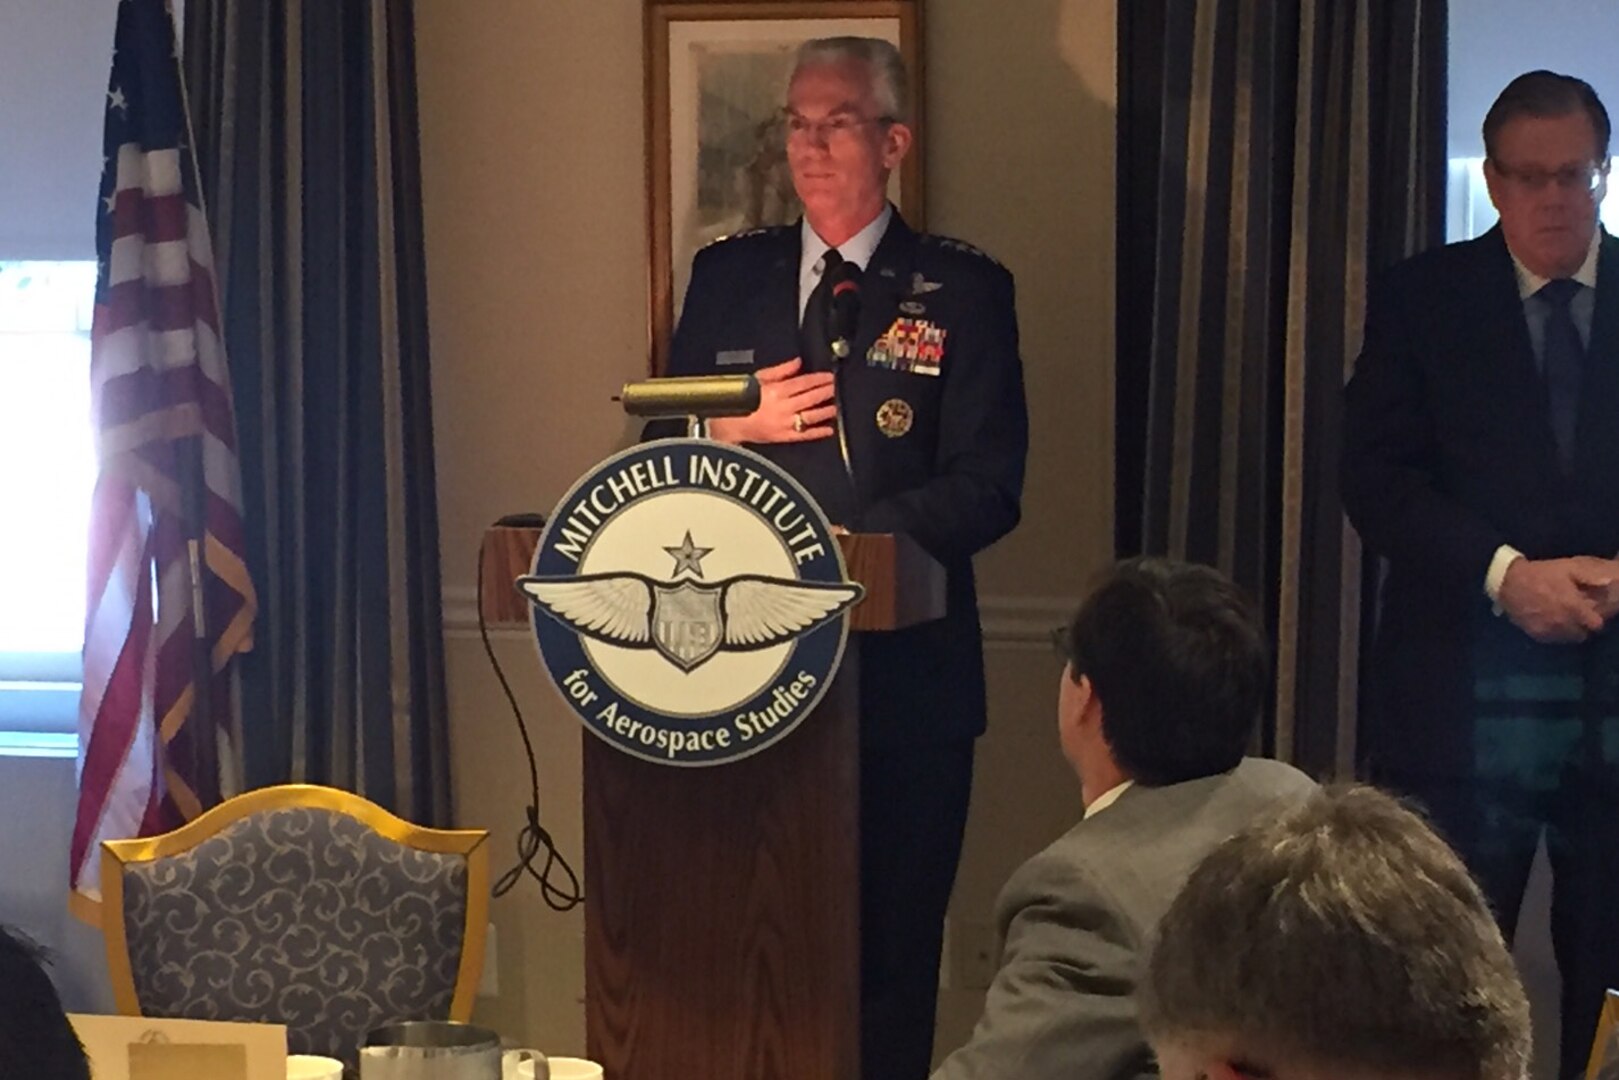 Air Force Gen. Paul J. Selva, the vice chairman of the Joint Chiefs of Staff, makes the case for nuclear deterrence recapitalization at the Air Force Association’s Mitchell Institute in Washington, D.C.